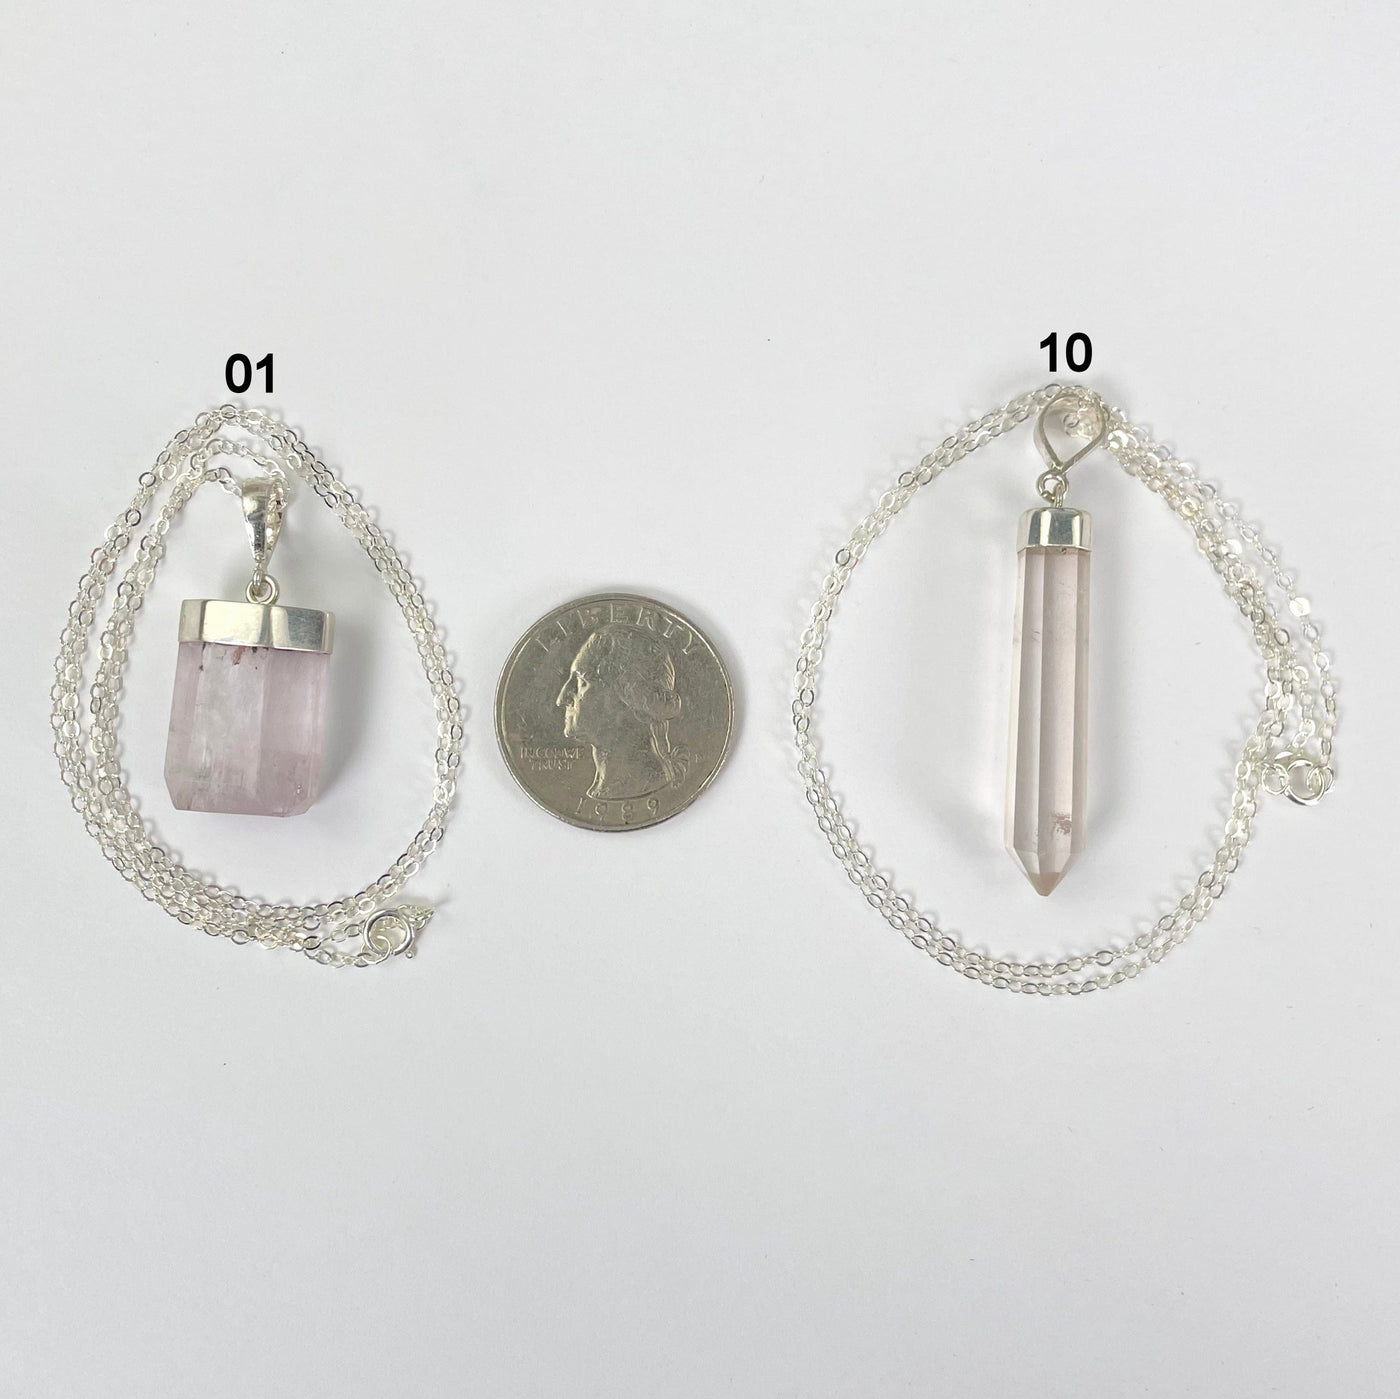 pink kunzite necklace option 01 and 10 (smallest and biggest) with quarter for size reference